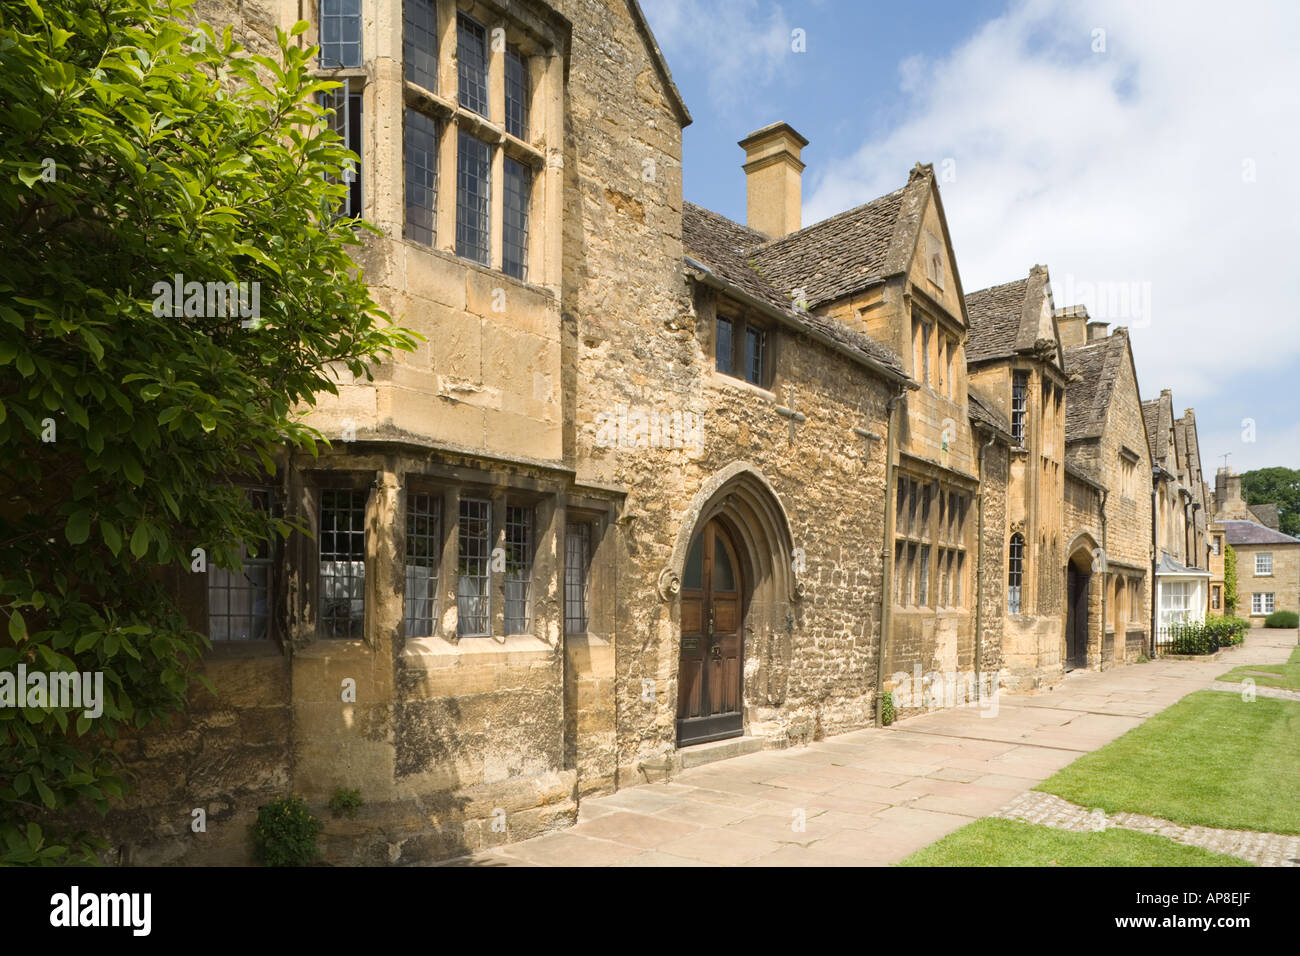 William Grevel's House (c.1320 AD) in the High Street of the Cotswold town of Chipping Campden, Gloucestershire Stock Photo